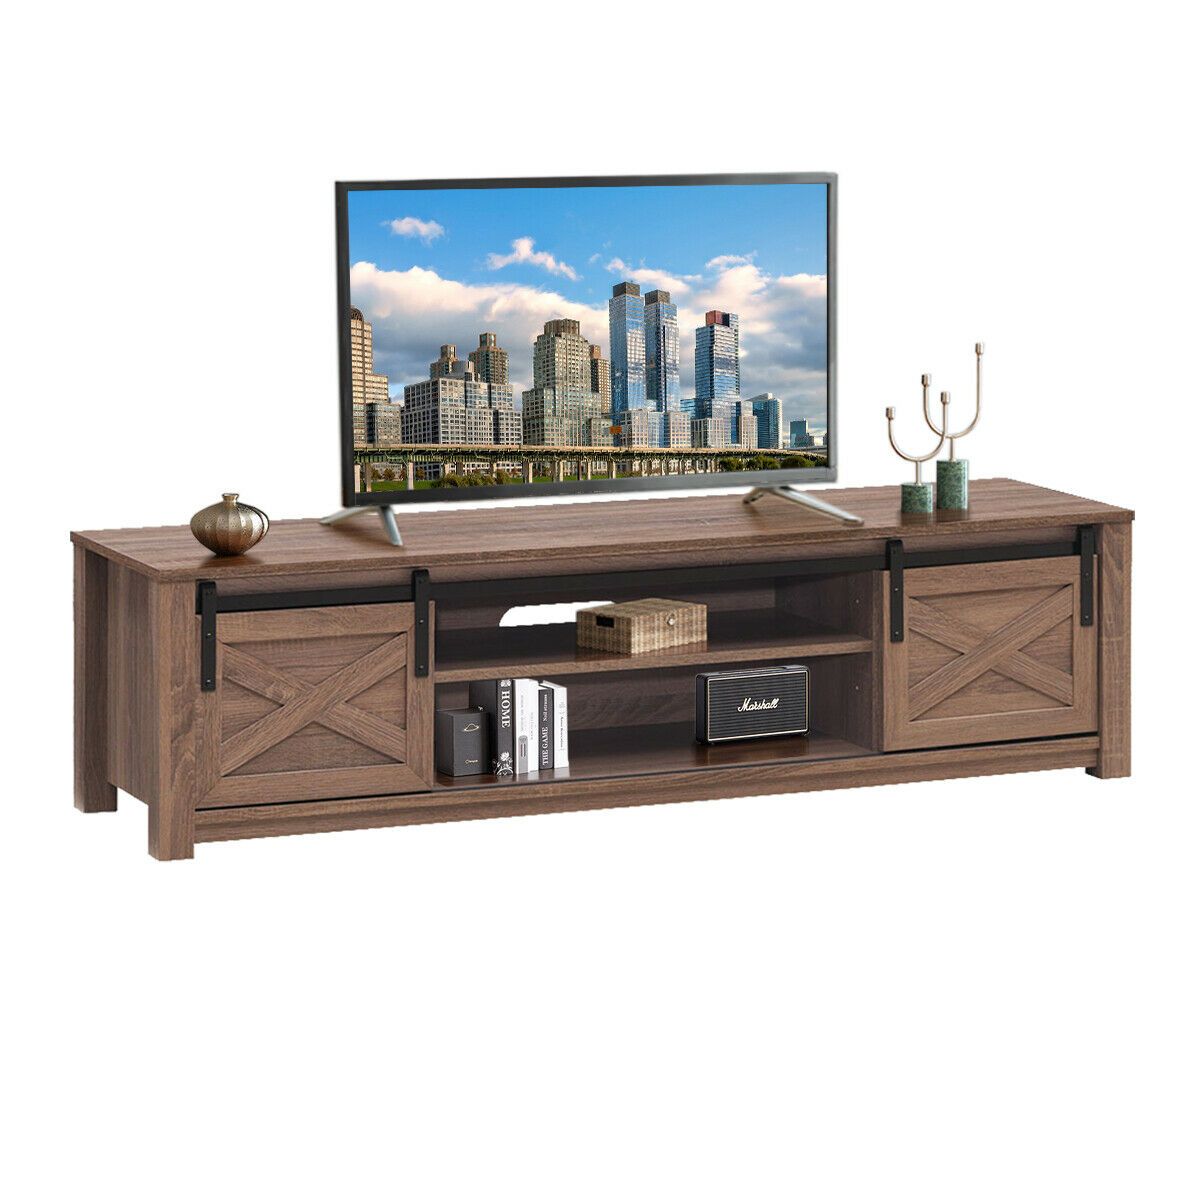 Gymax Sliding Barn Door Tv Stand For Tv's Up To 65 Intended For Tv Mount And Tv Stands For Tvs Up To 65" (View 6 of 15)